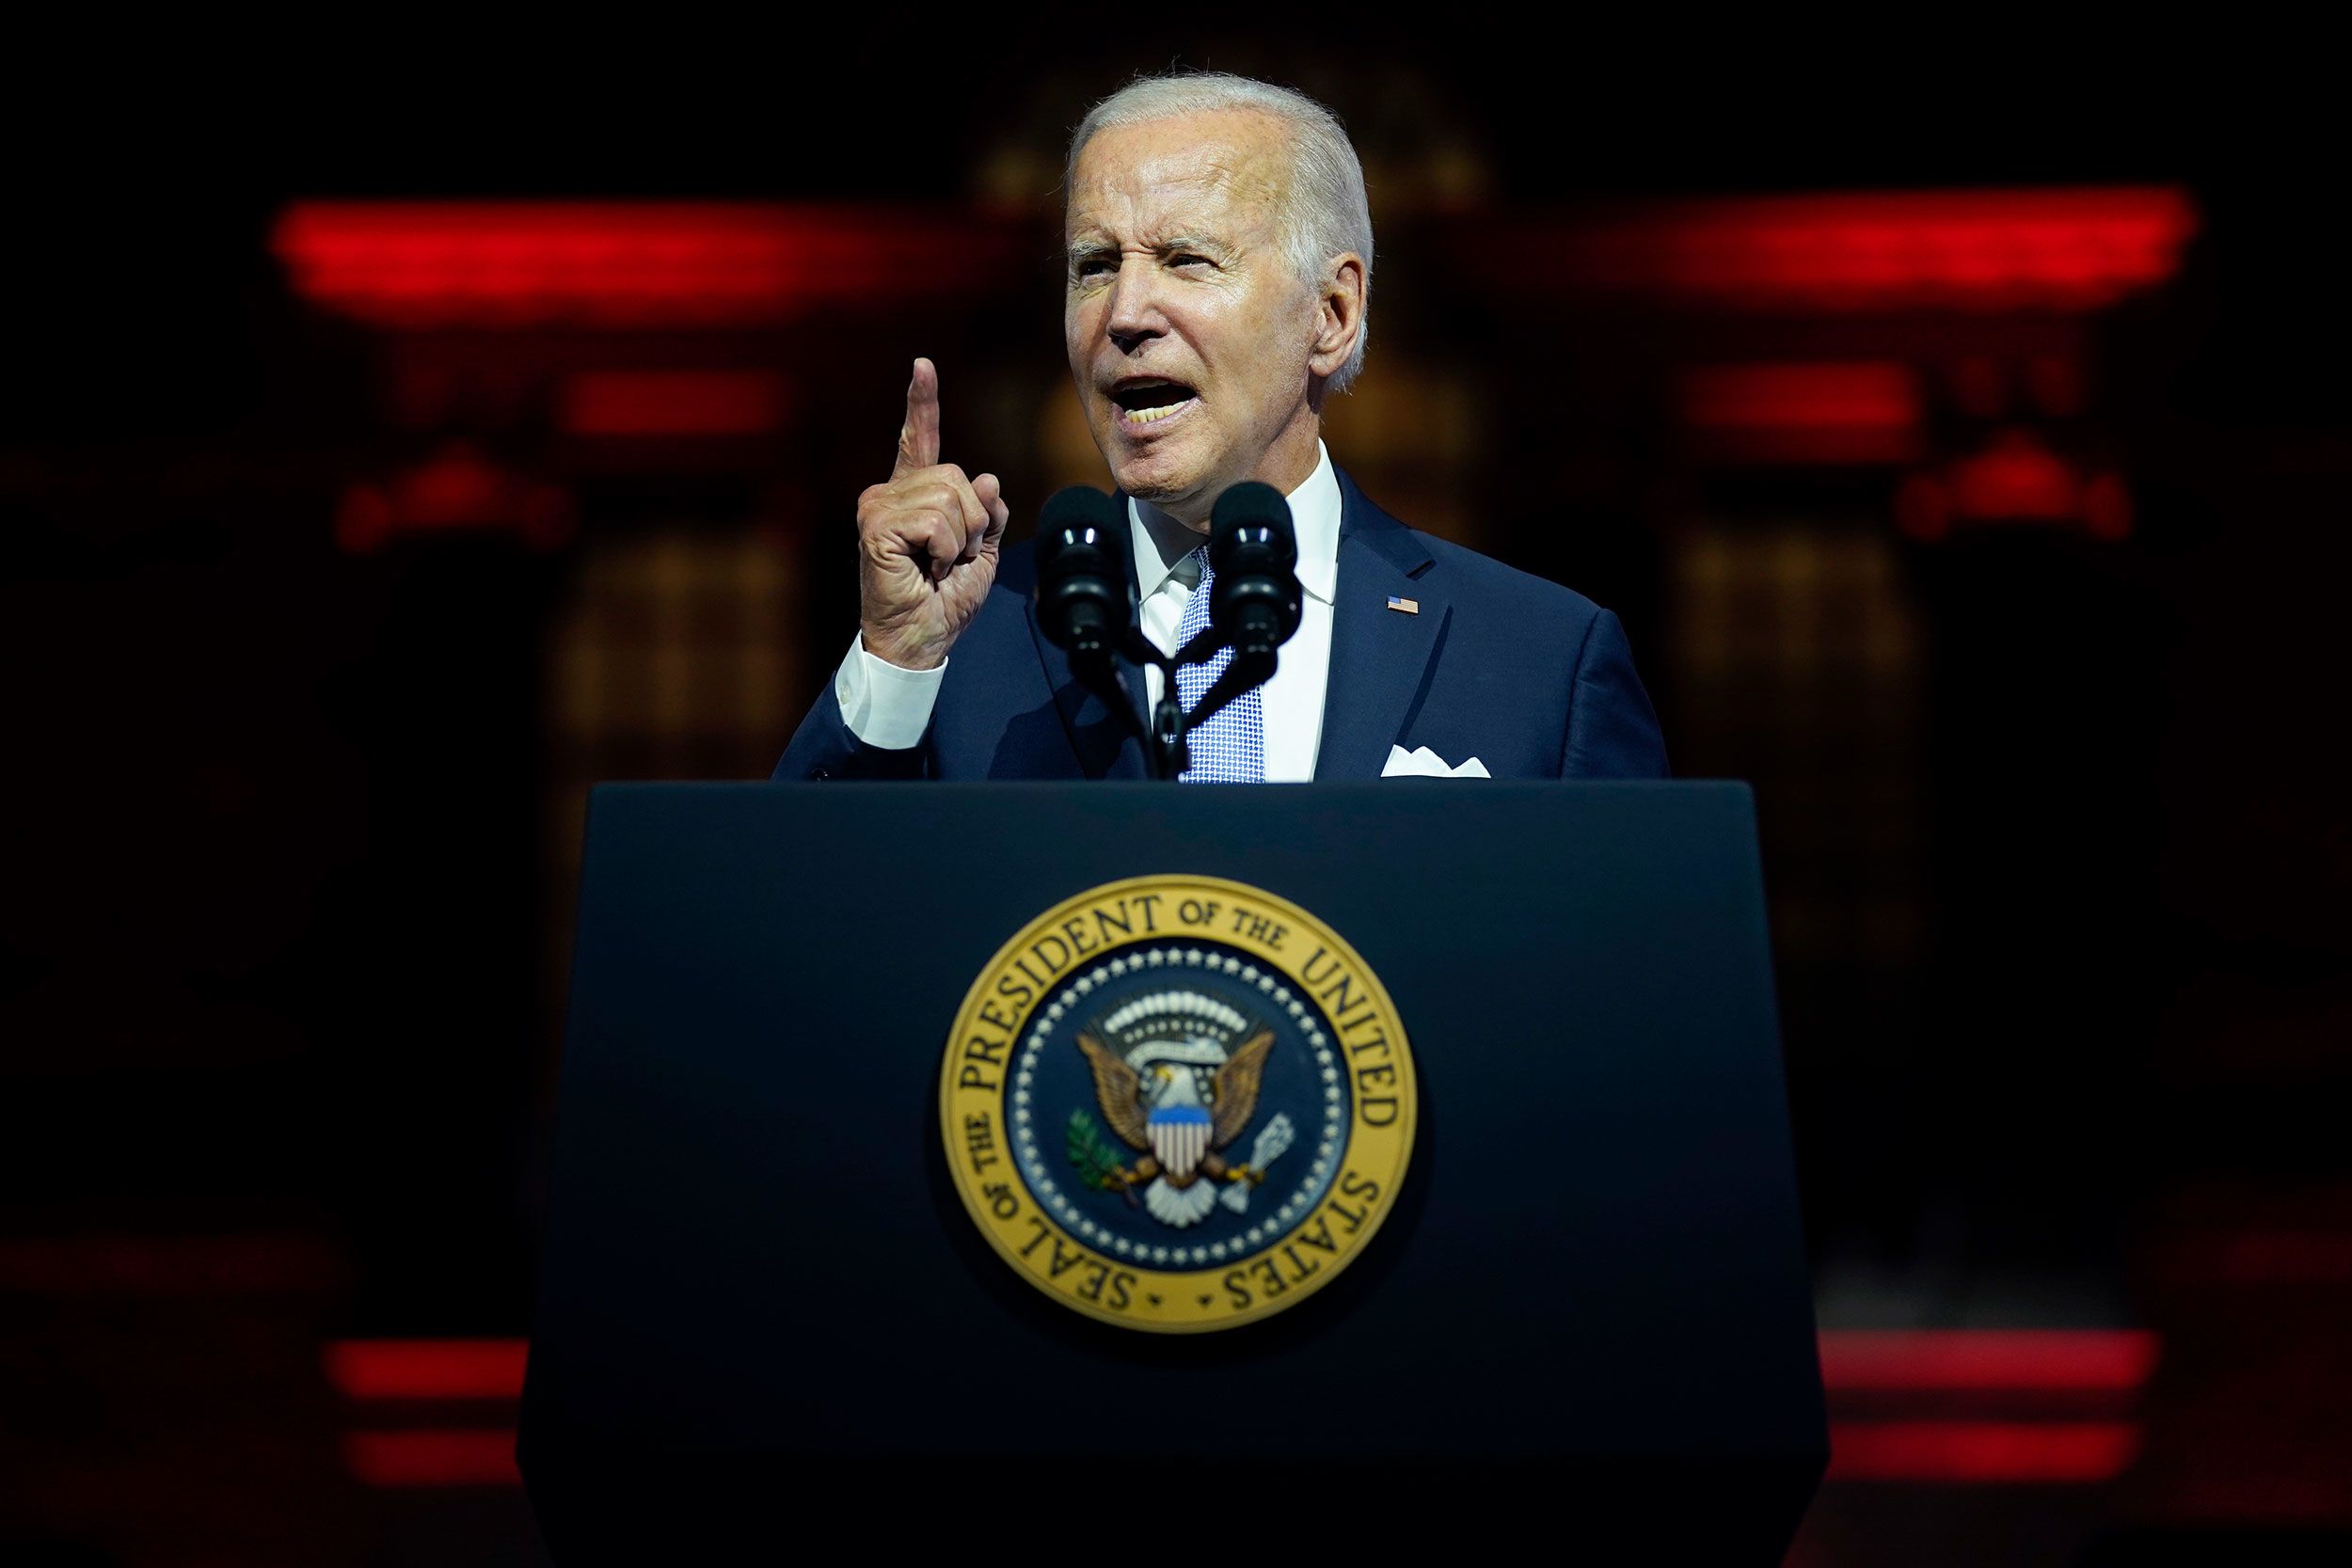 Biden says 'MAGA Forces' trying to repeal rights, people must defend US democracy